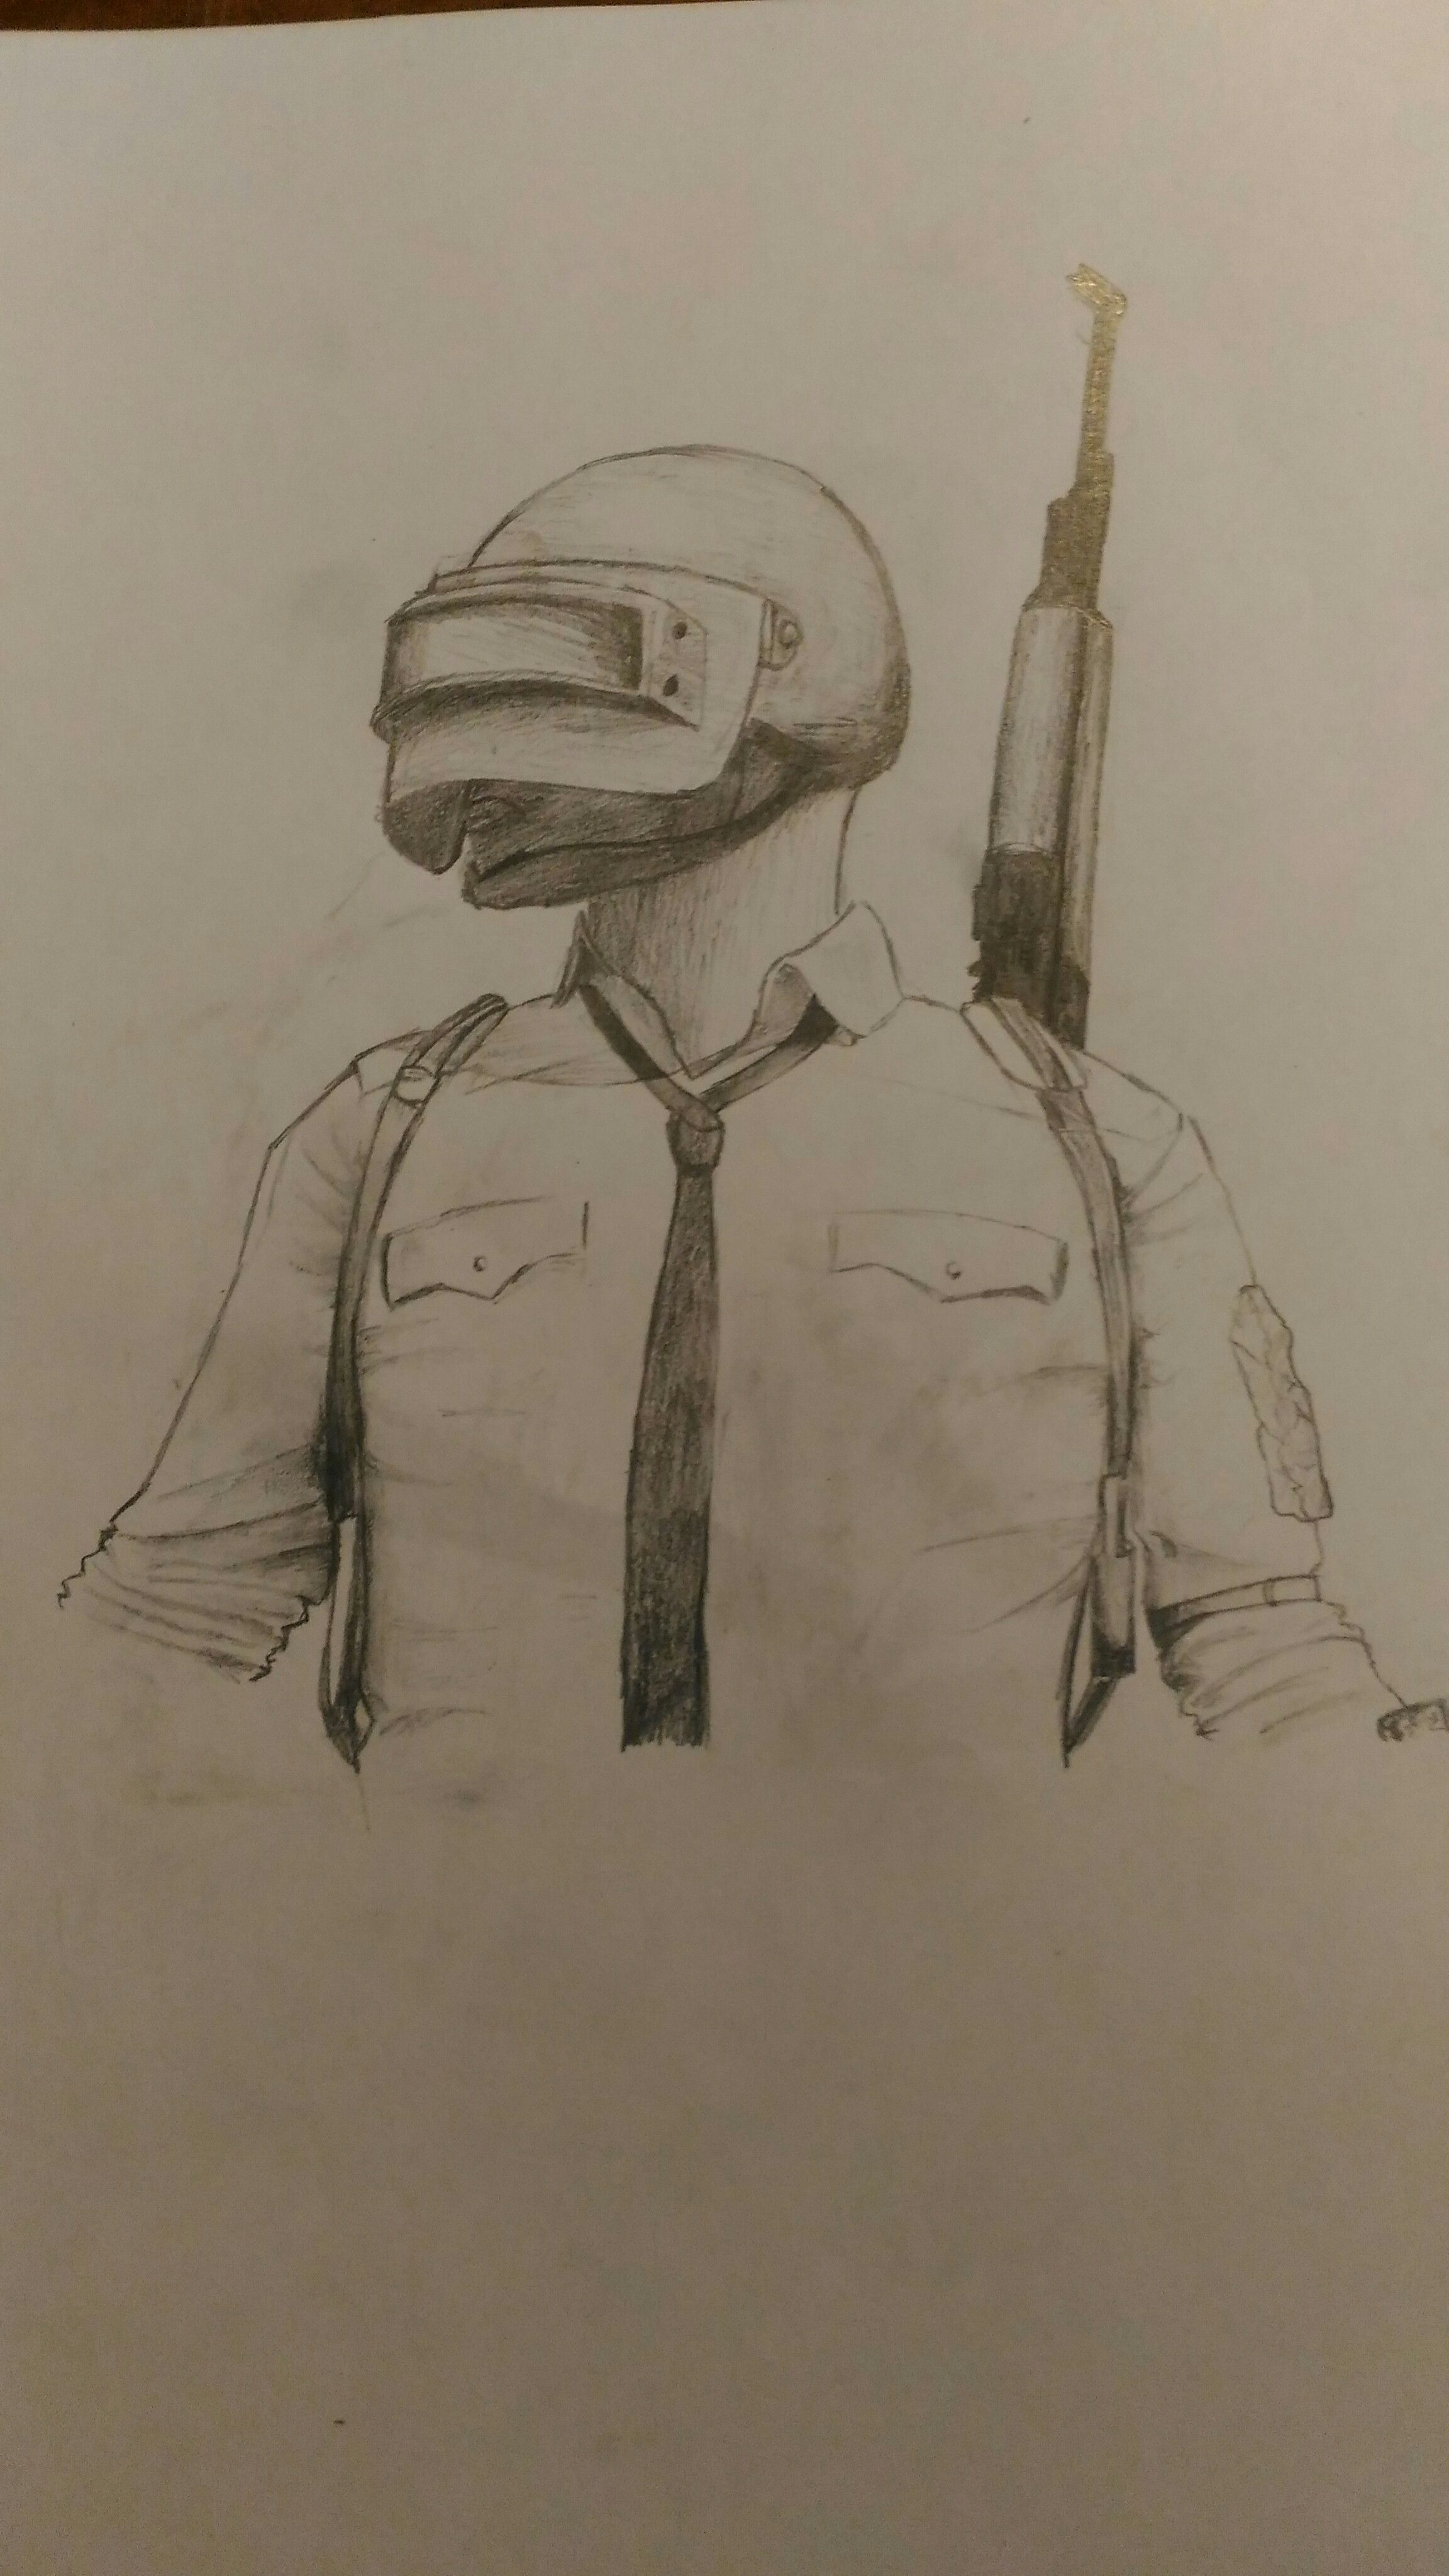 PUBG Drawing, Pencil, Sketch, Colorful, Realistic Art Images Drawing